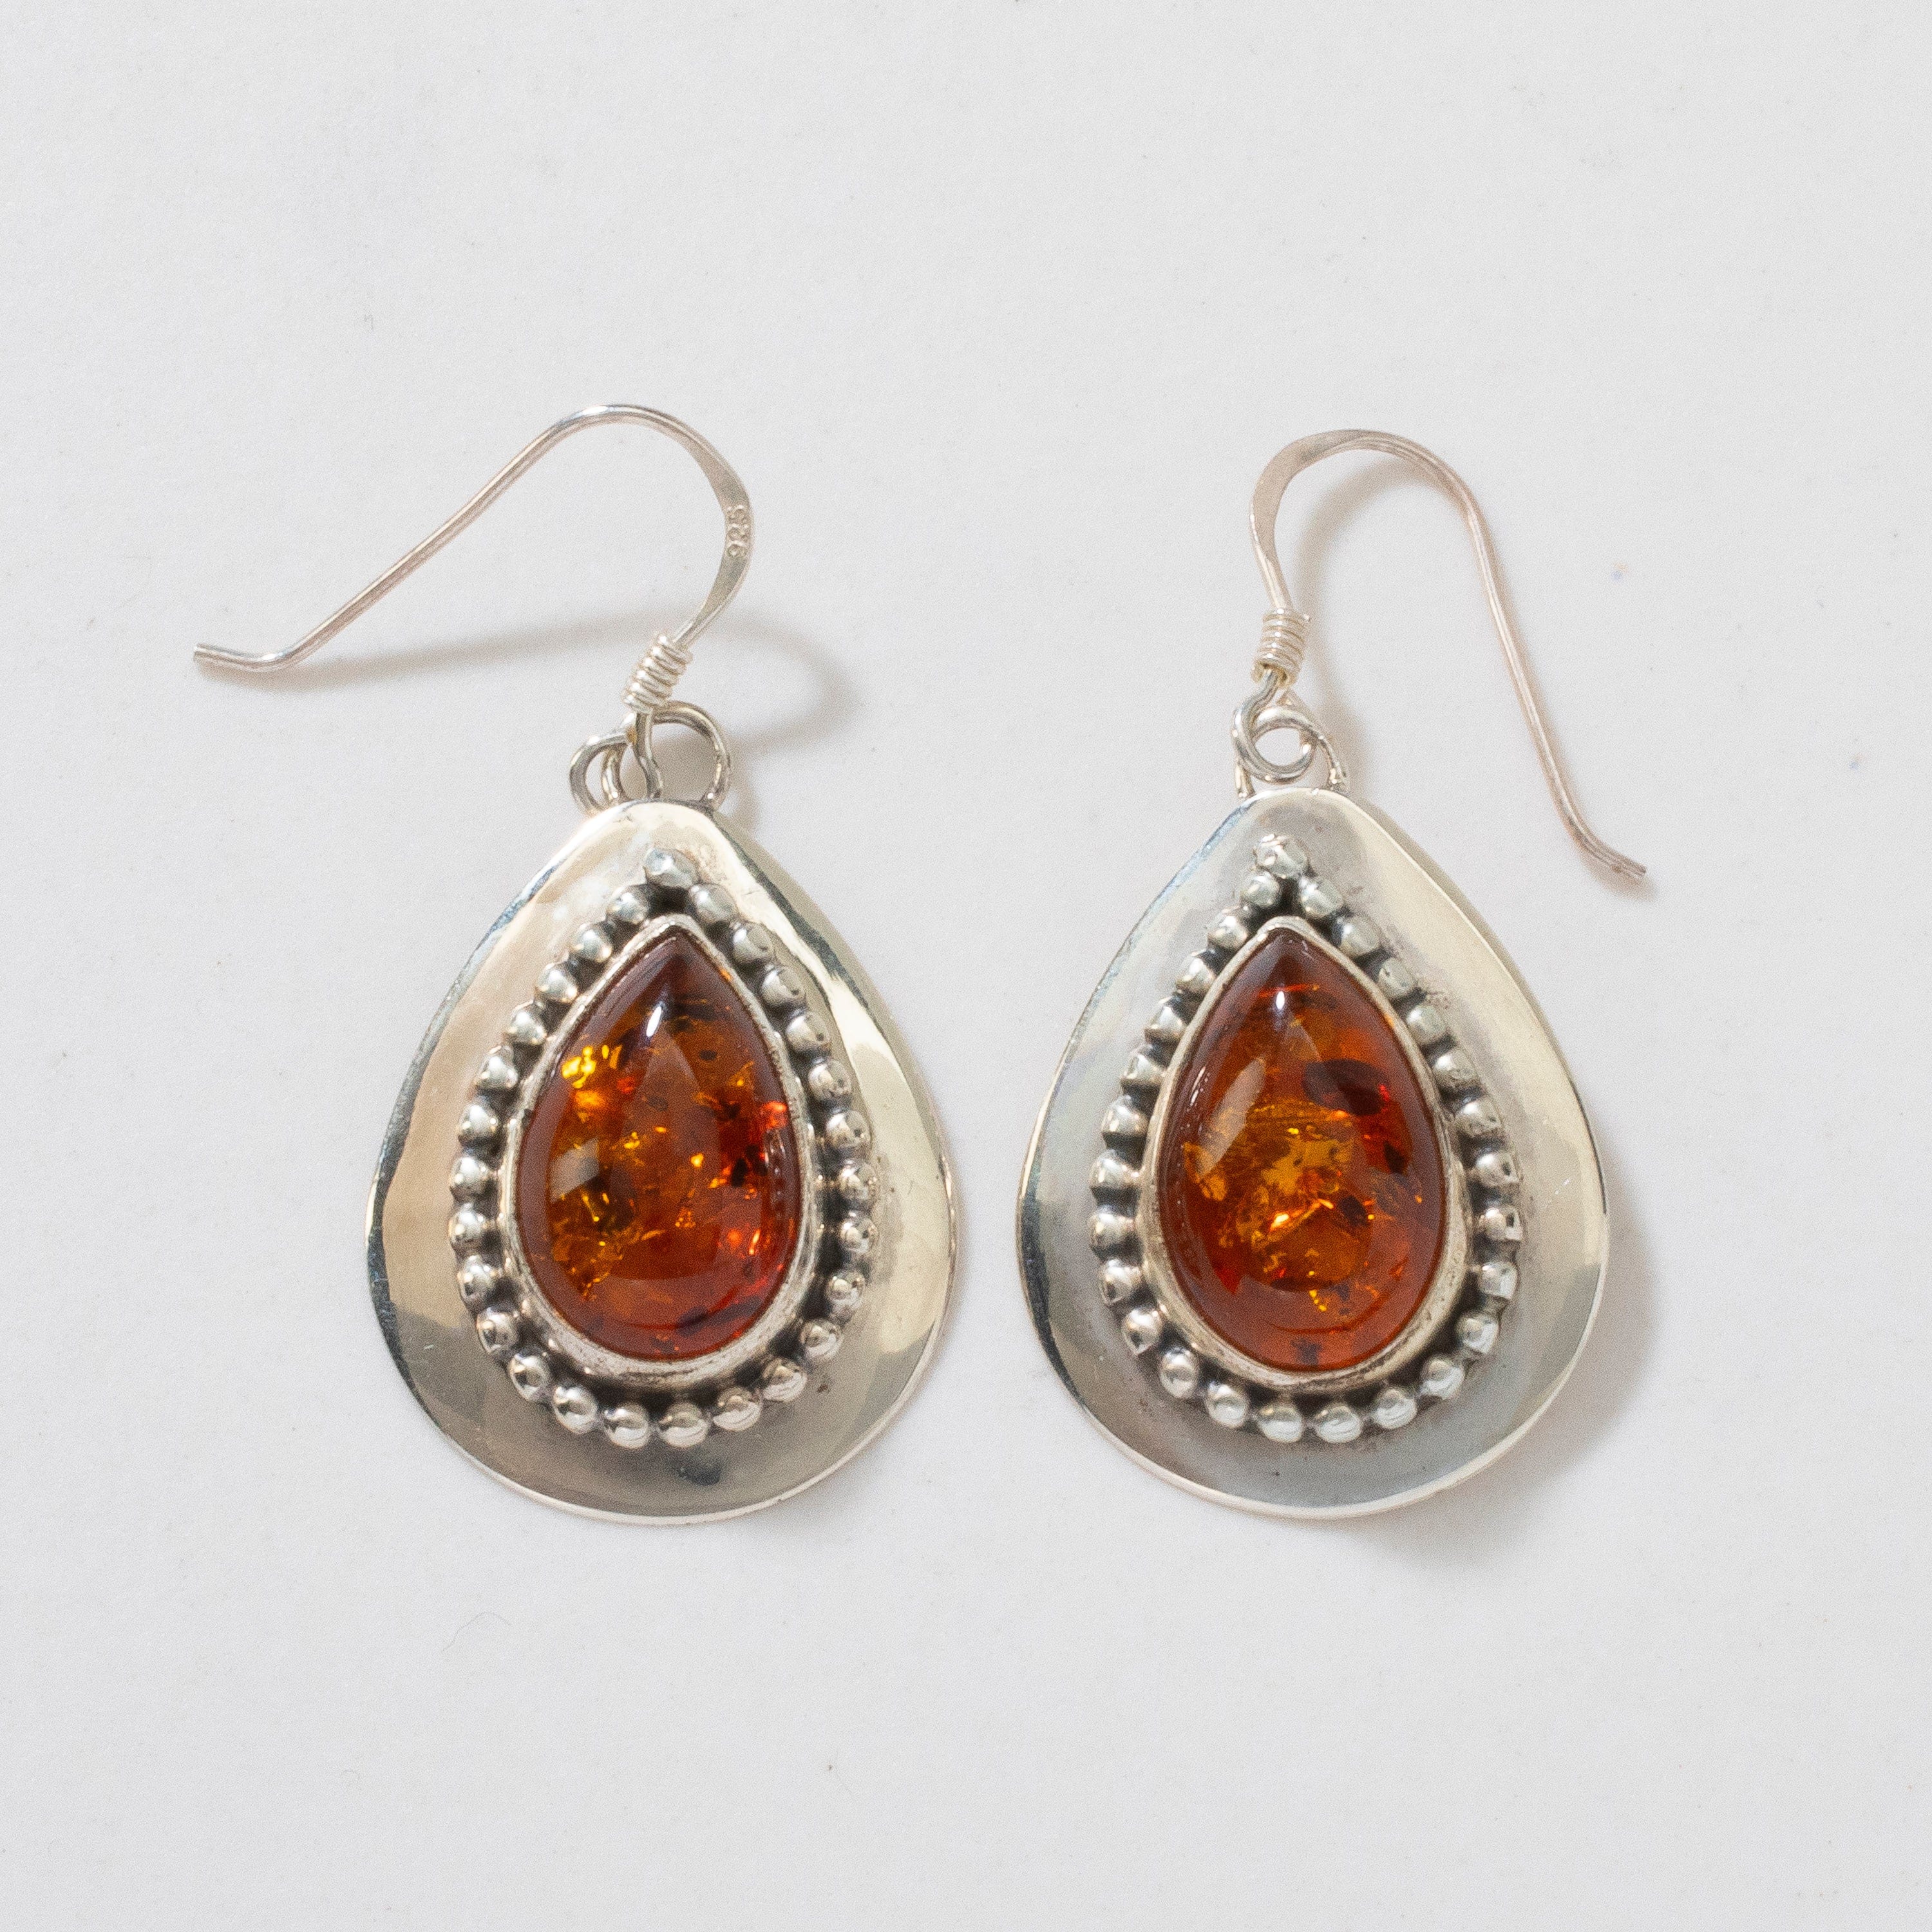 Kalifano Native American Jewelry Baltic Amber Teardrop Navajo USA Native American Made 925 Sterling Silver Earrings with French Hook NAE300.028